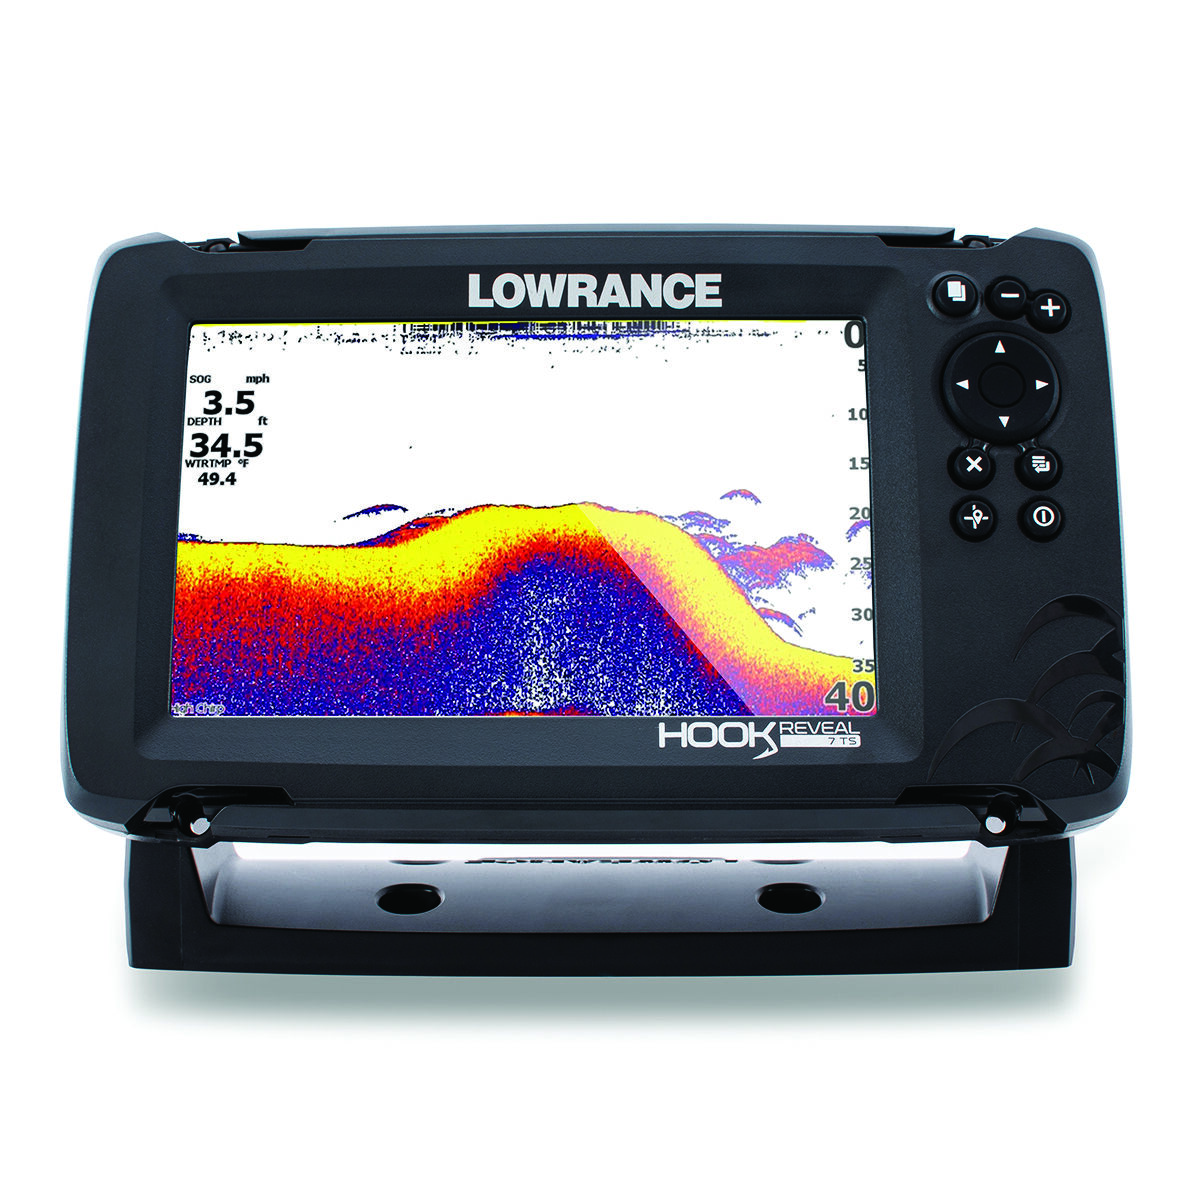 Lowrance Hook Reveal 5 Fish Finder - 5 Inch Screen with Transducer and C-MAP  Preloaded Map Options